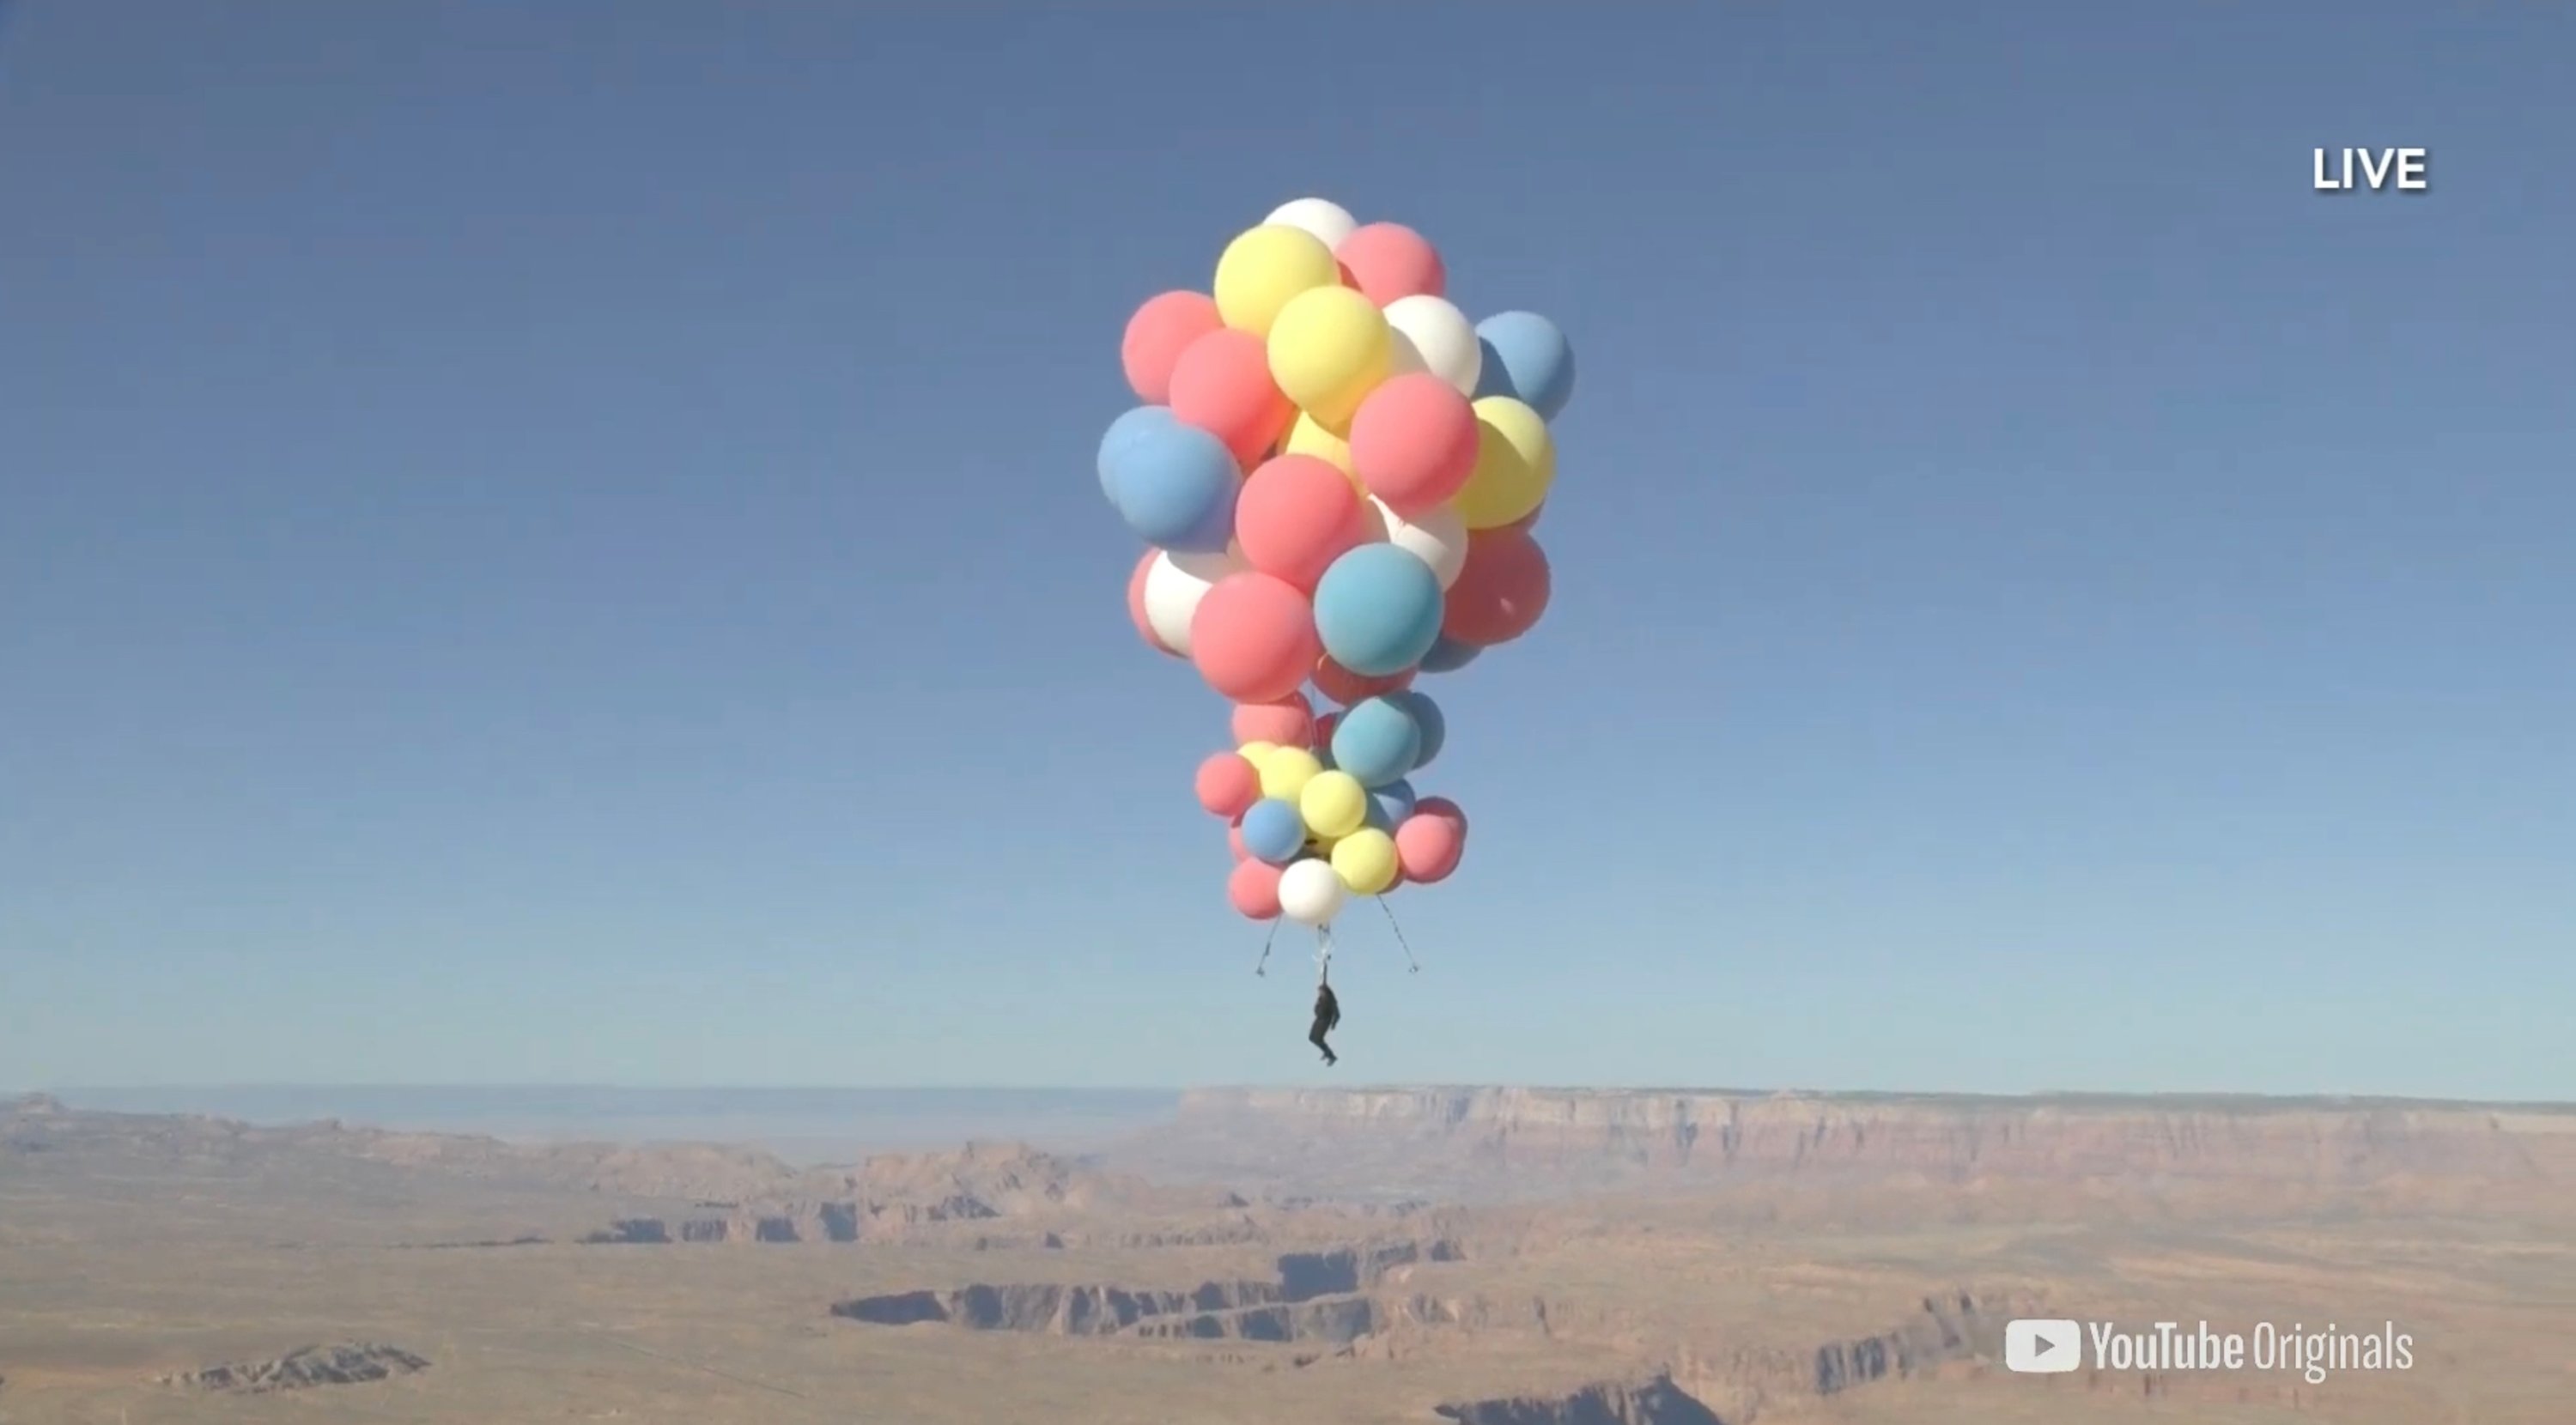 Extreme performer David Blaine hangs with a parachute under a cluster of balloons during a stunt to fly thousands of feet into the air, in a still image from video taken over Page, Arizona, U.S., Sept. 2, 2020. (David Blaine handout via Reuters)